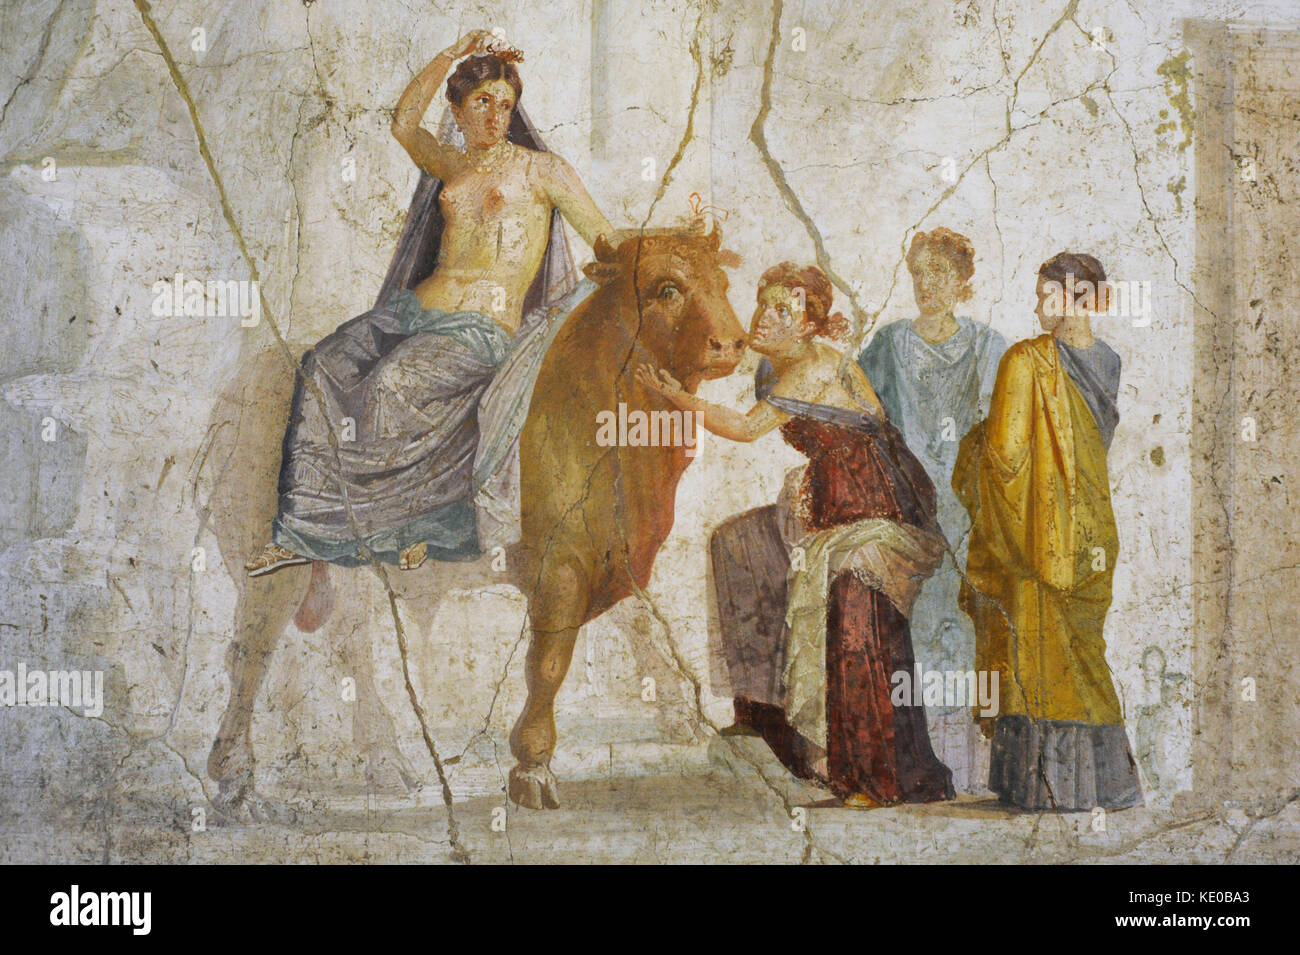 Fresco depicting The Abduction of Europe. Attributed to Master Chiaro. 1st century AD. Fourth Pompeian Style (45-79). Pompeii. National Archaeological Museum. Naples. Italy. Stock Photo